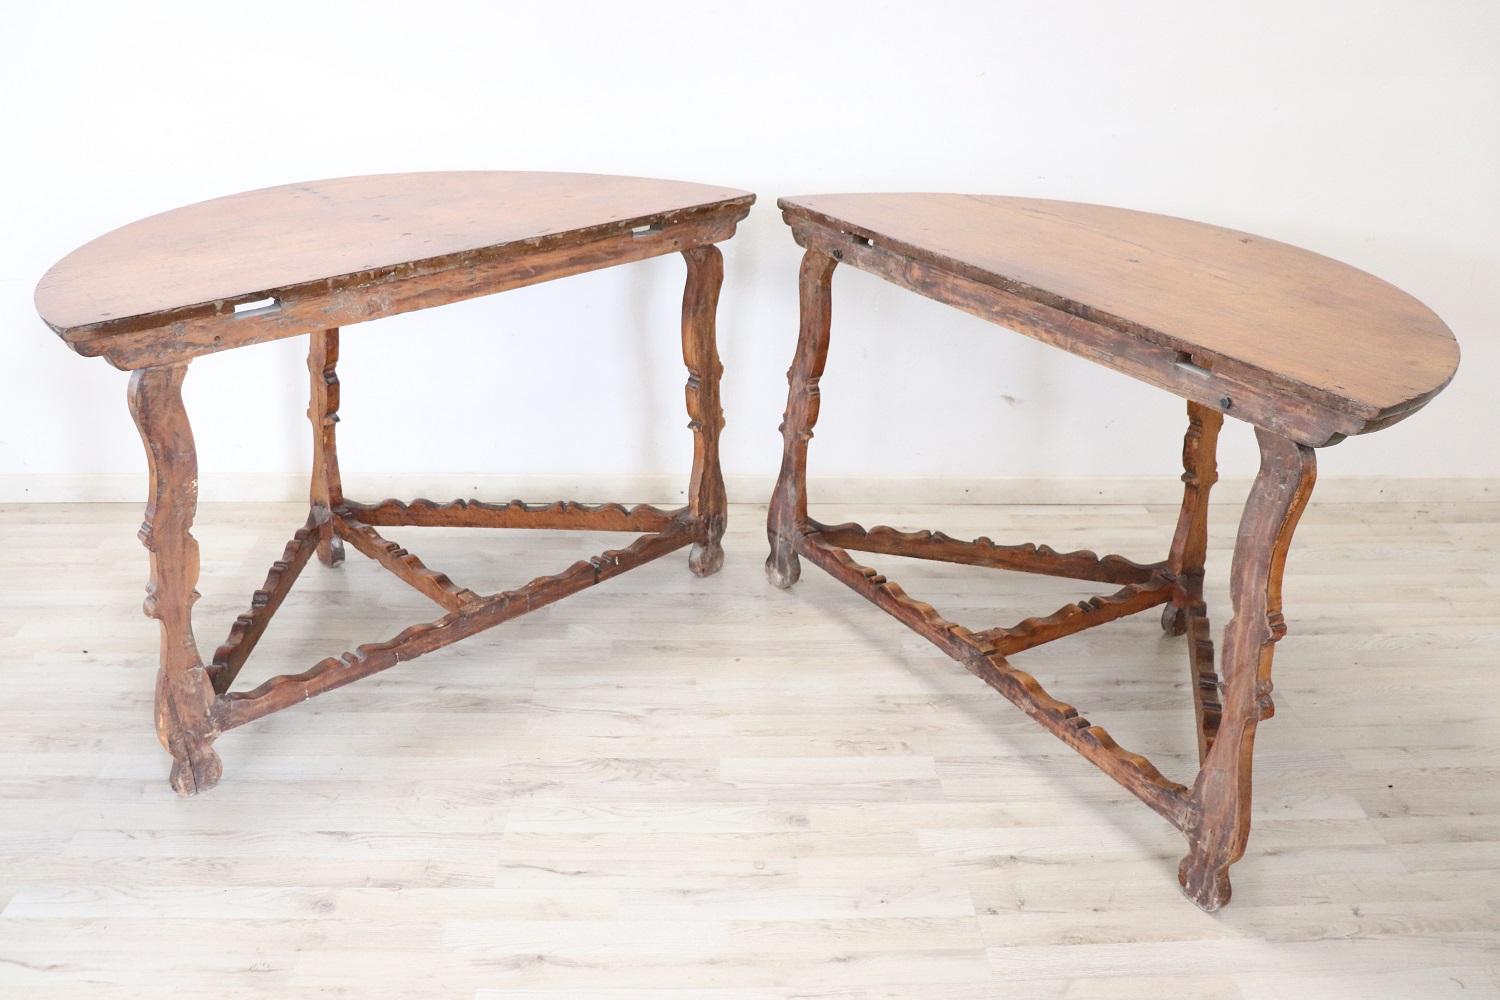 Hand-Carved 17th Century Rare Antique Pair of Console Table Convertible into a Round Table